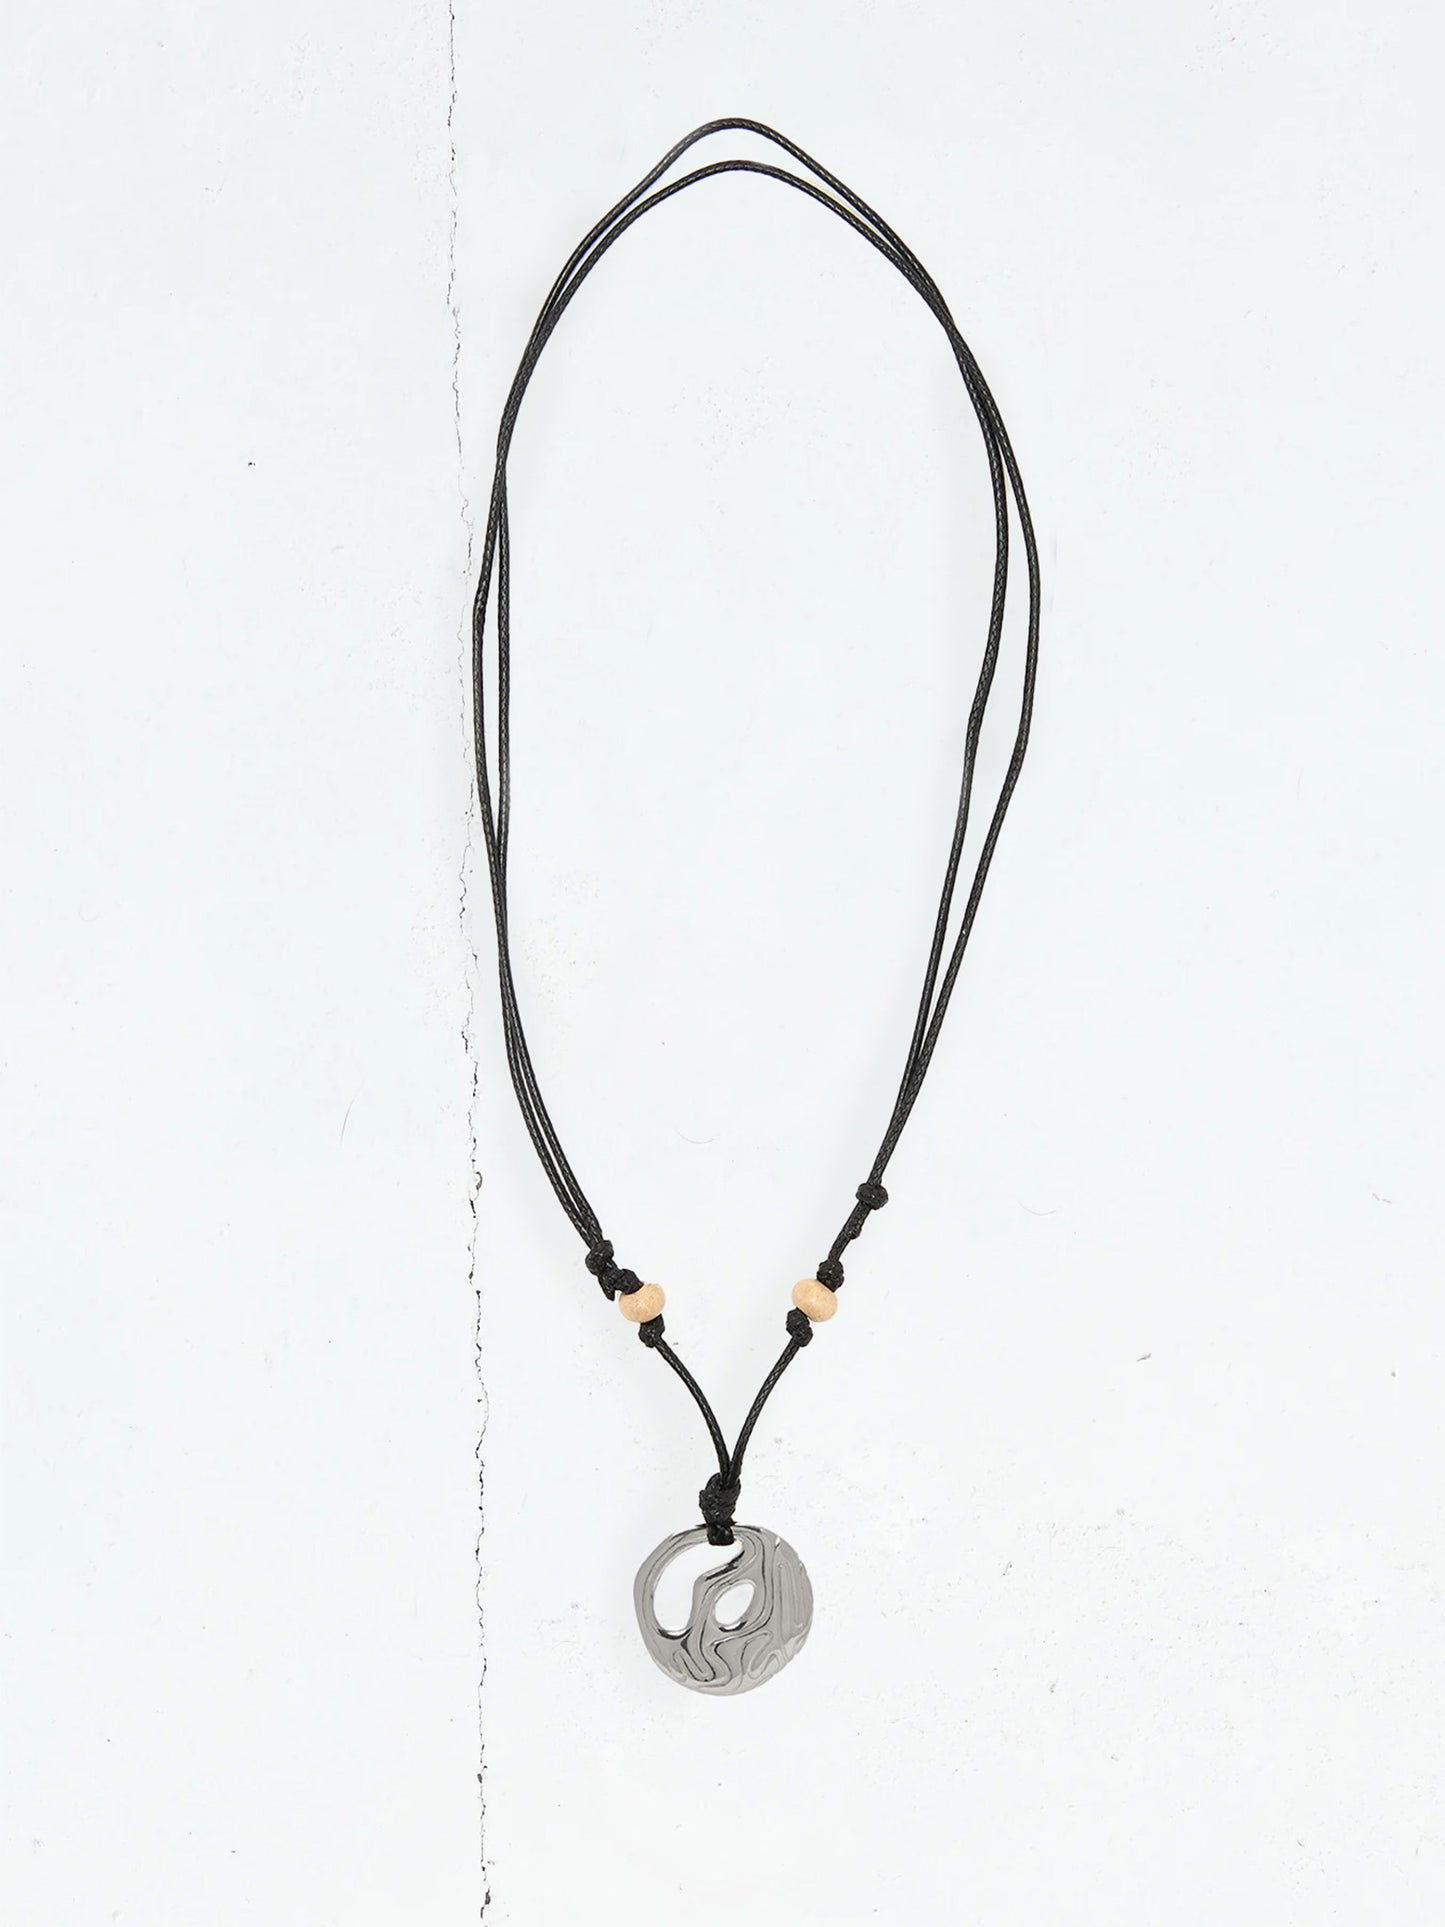 Story mfg. x octi Necklace (2)